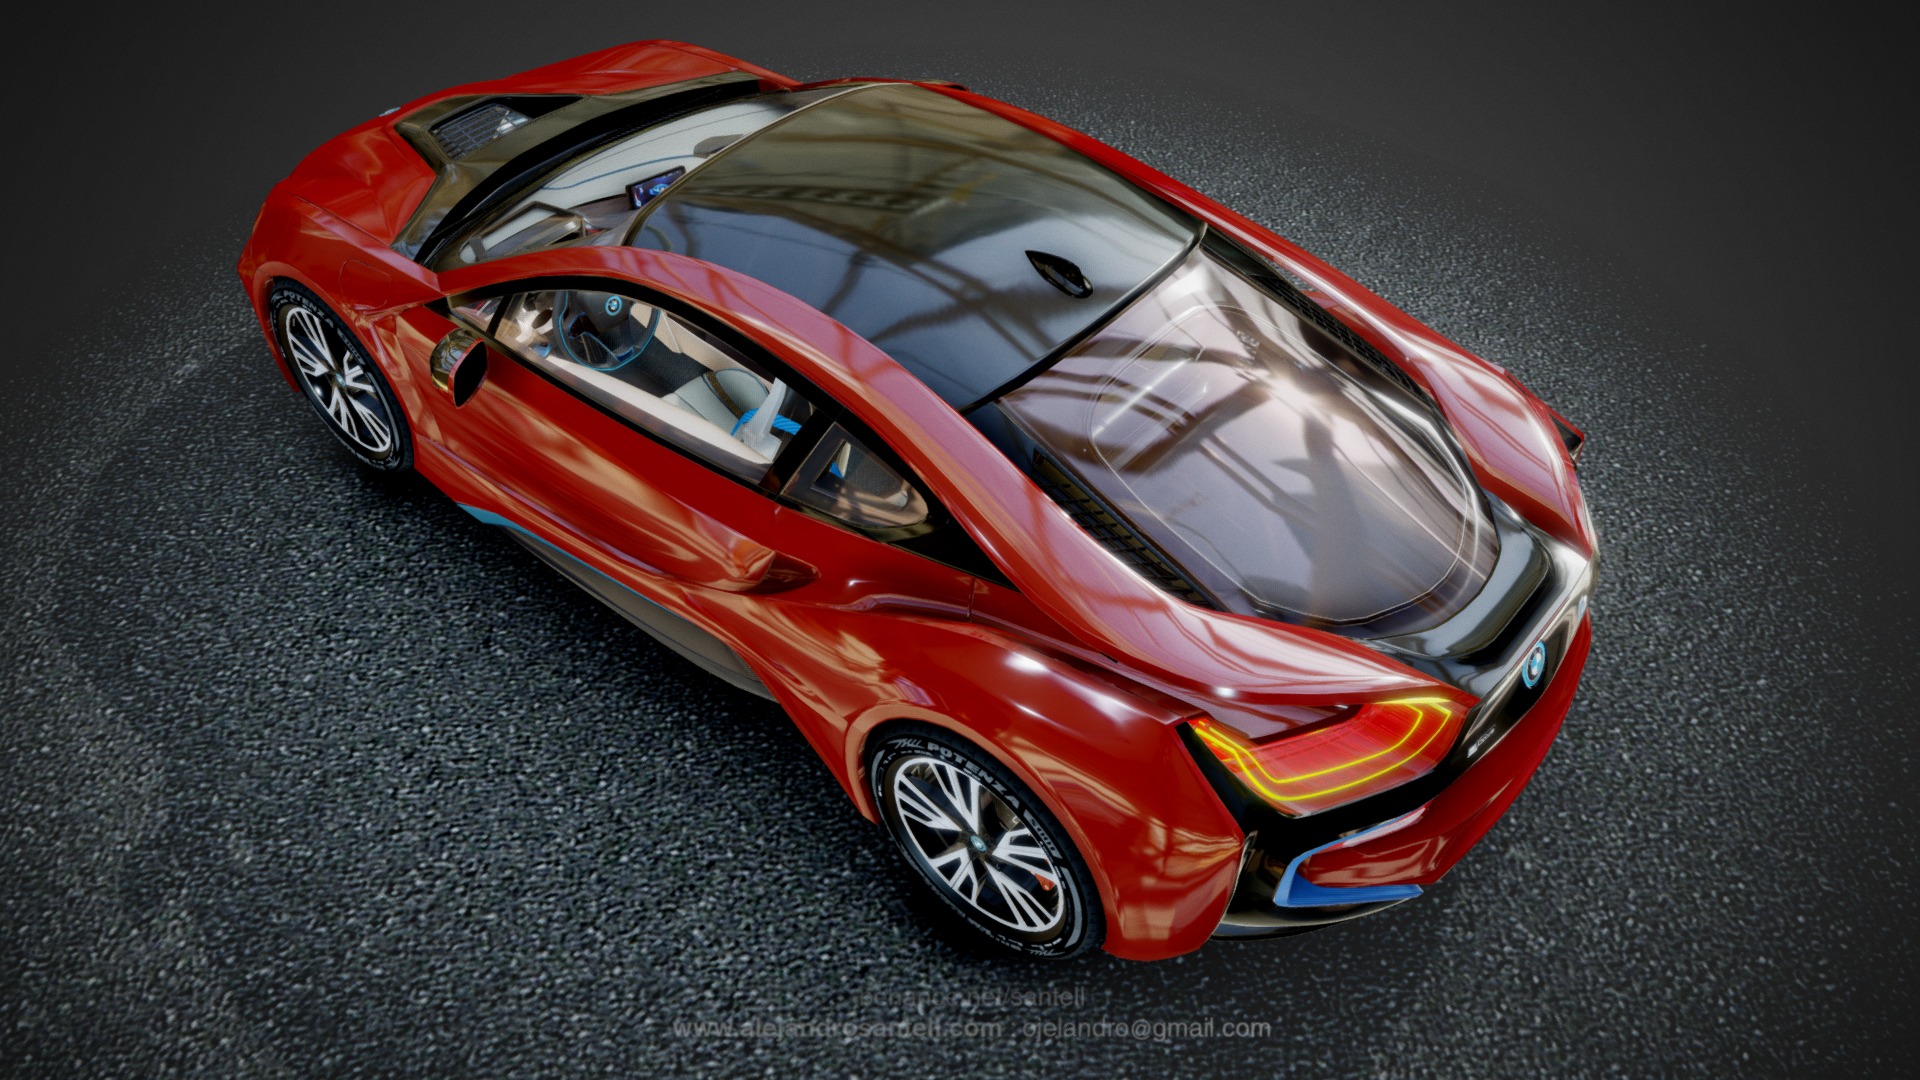 3D model The BMW i8 Protonic Red Edition 2016 - This is a 3D model of the The BMW i8 Protonic Red Edition 2016. The 3D model is about a red sports car.